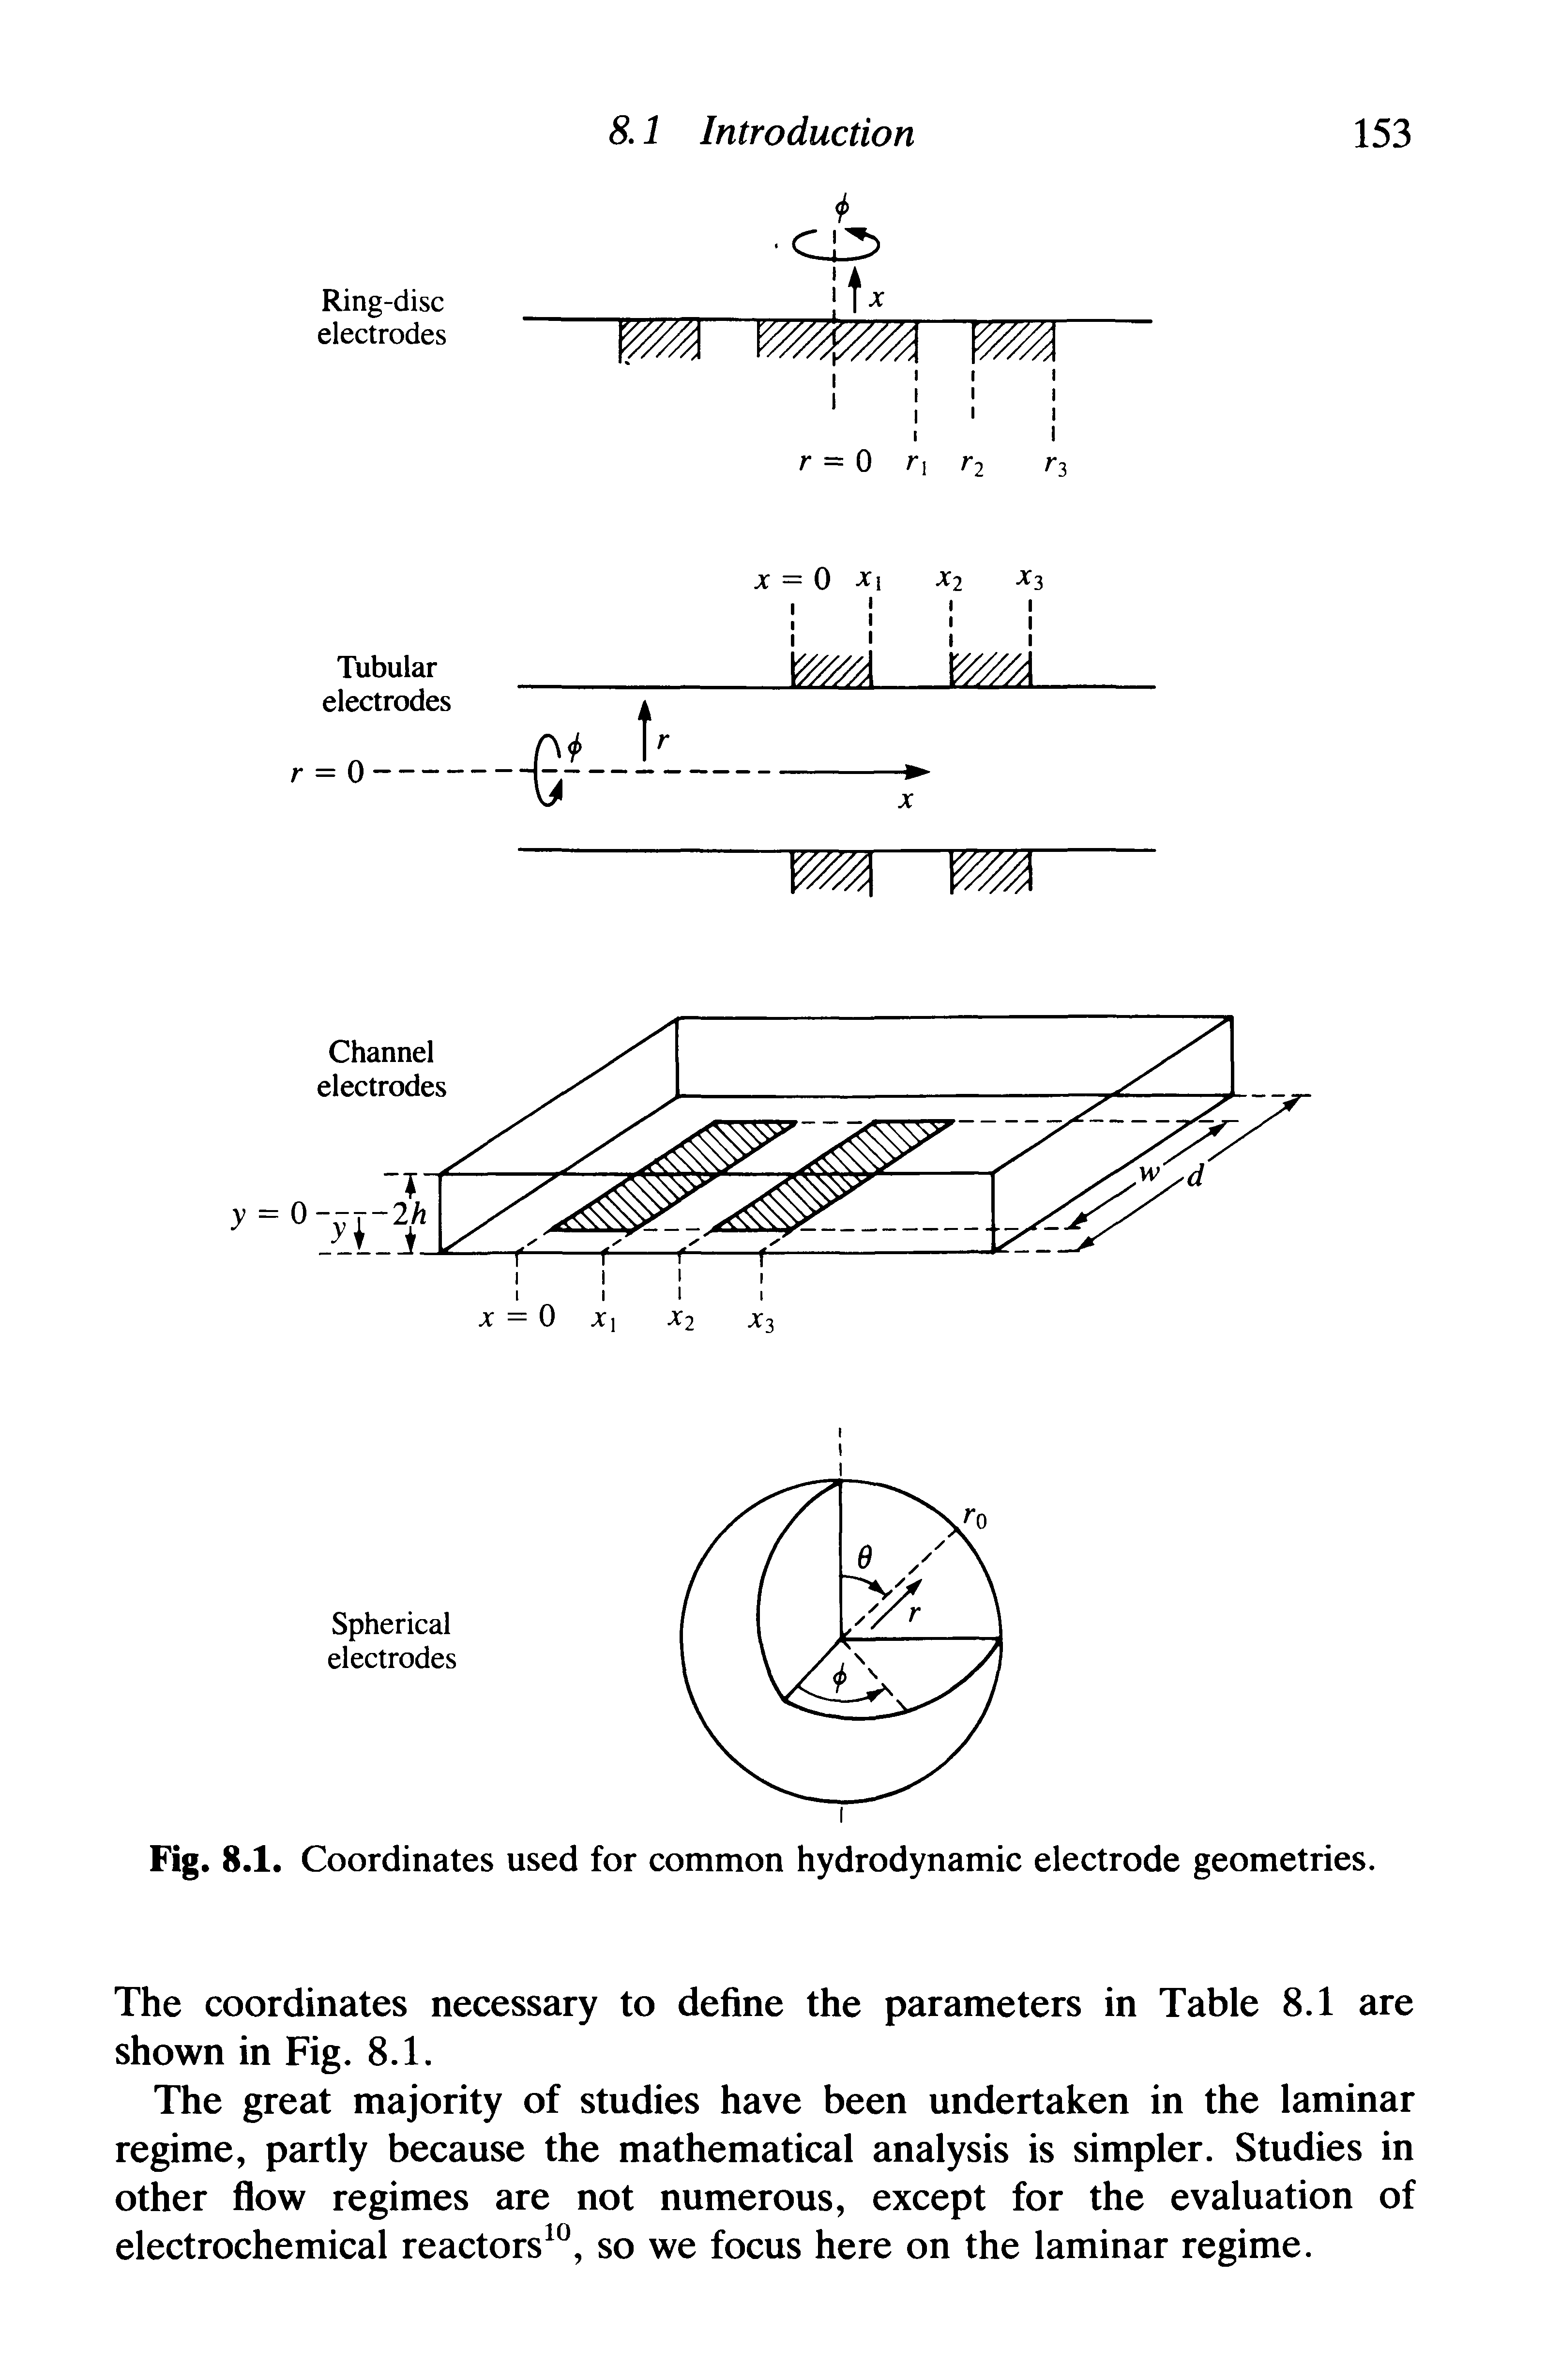 Fig. 8.1. Coordinates used for common hydrodynamic electrode geometries.